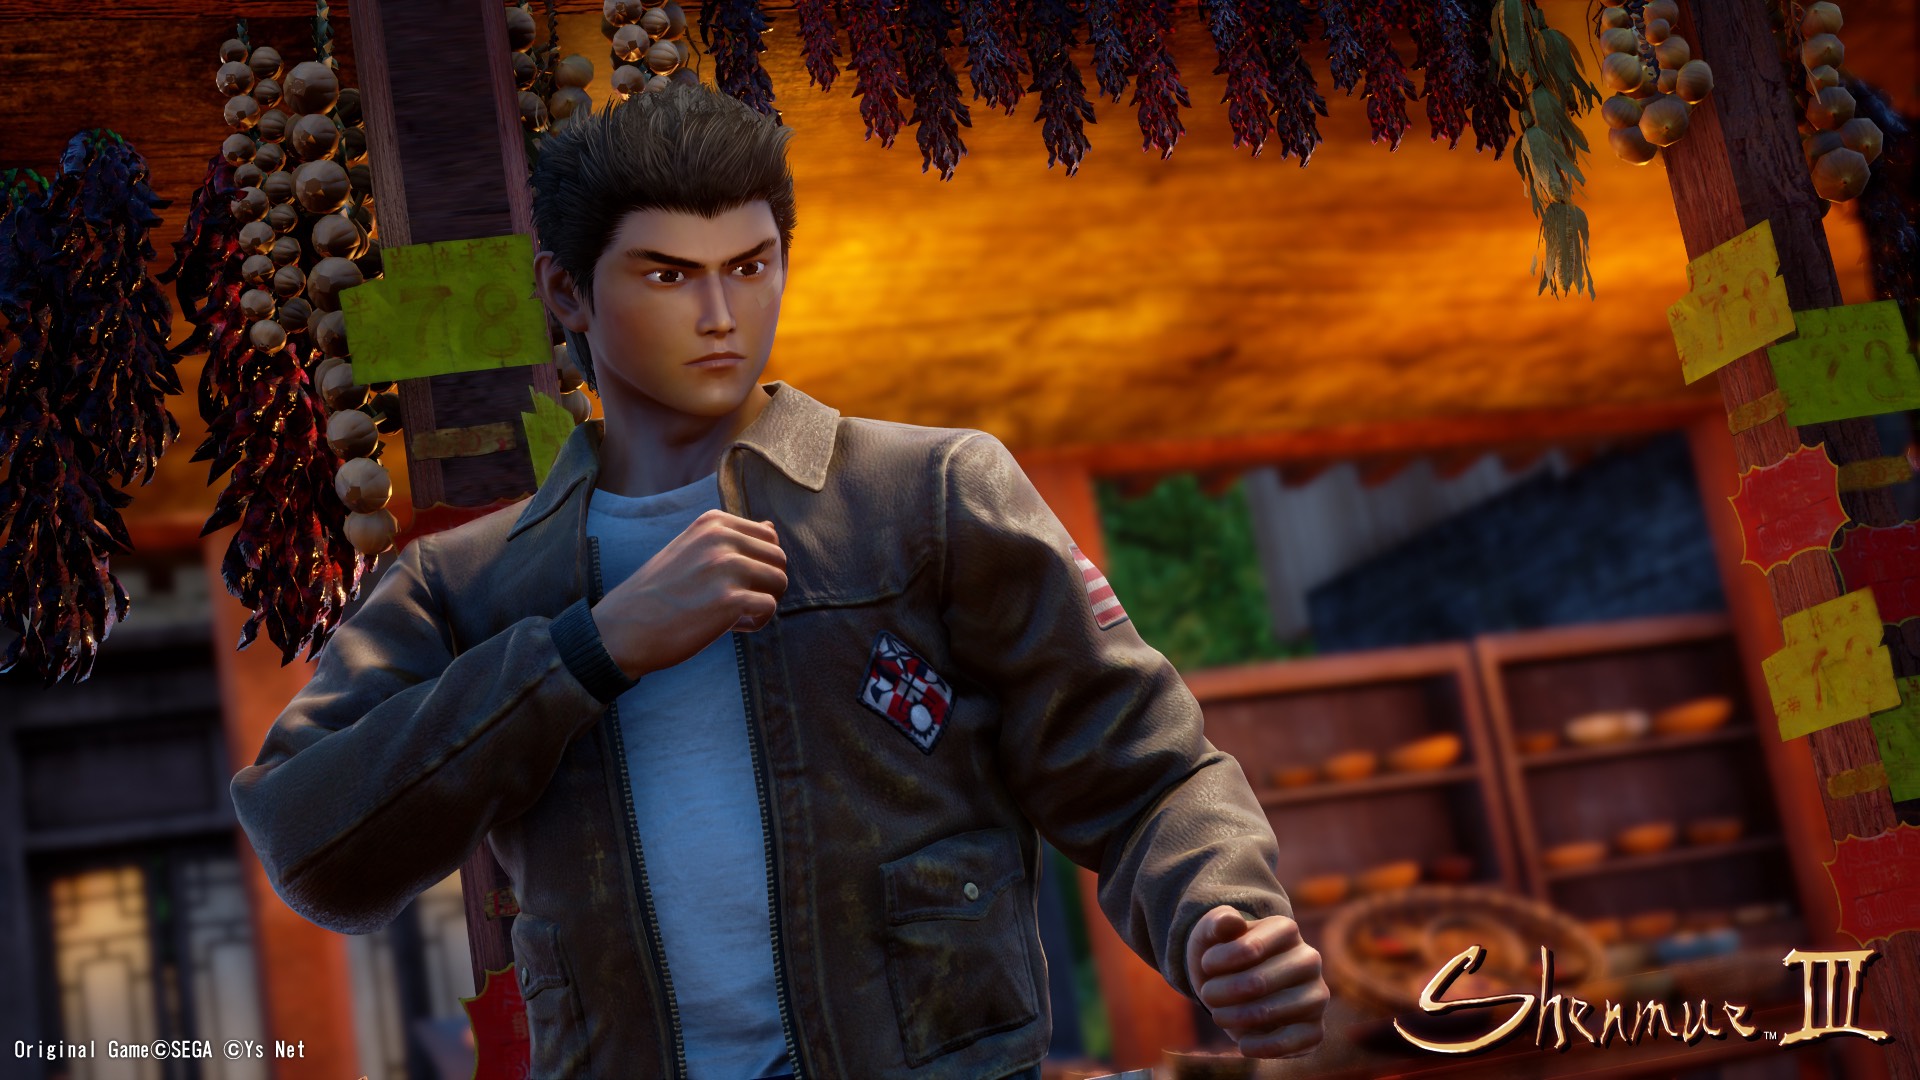 A man stands poised for a brawl in Shenmue III.